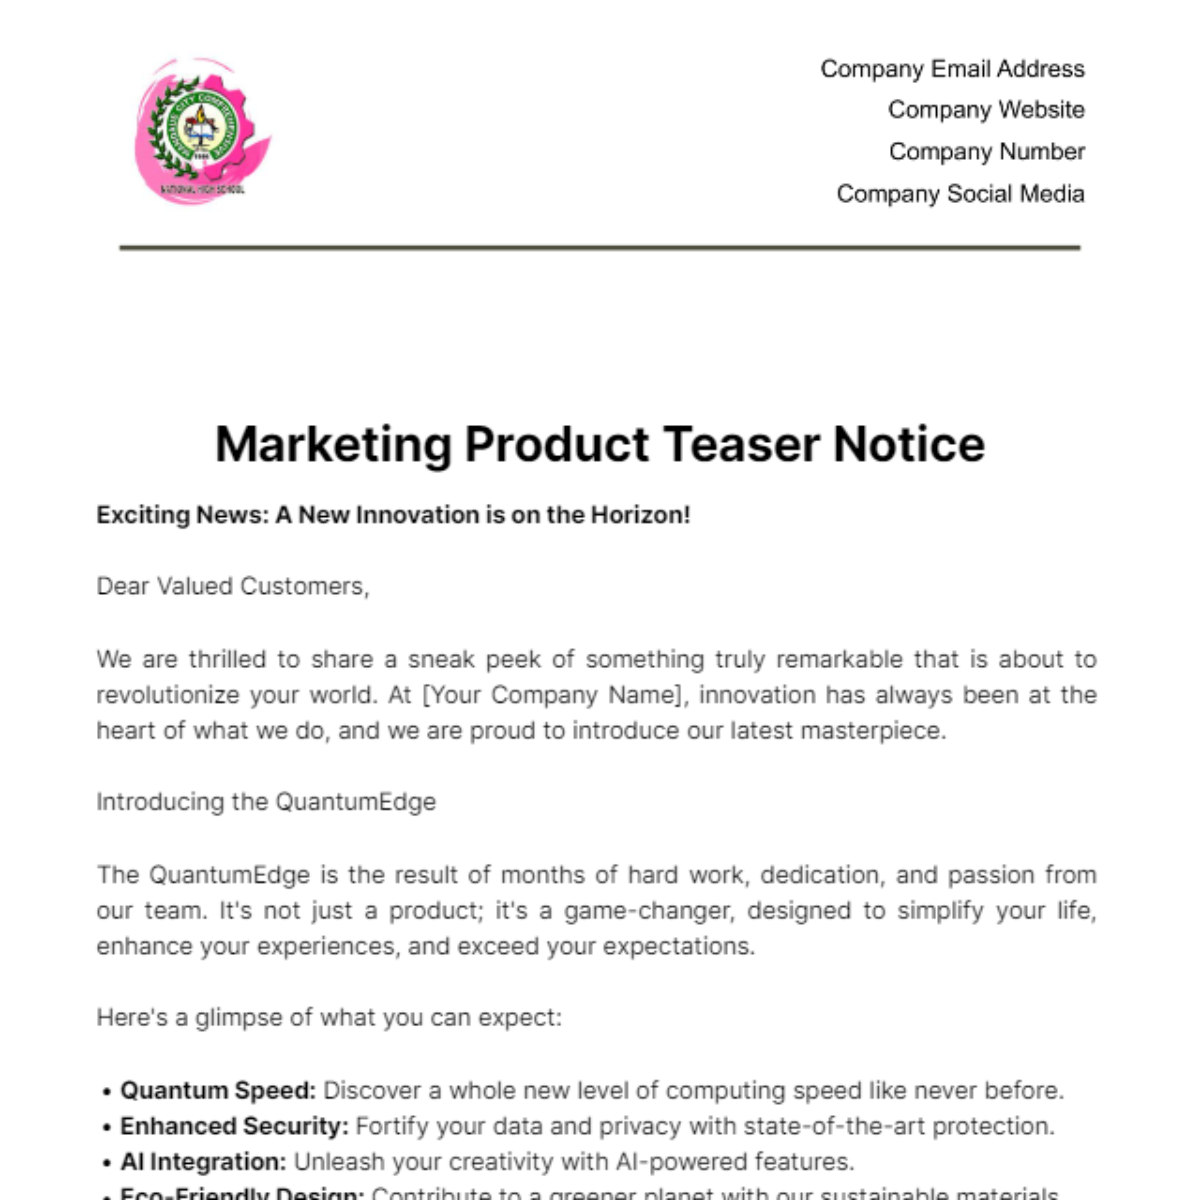 Marketing Product Teaser Notice Template